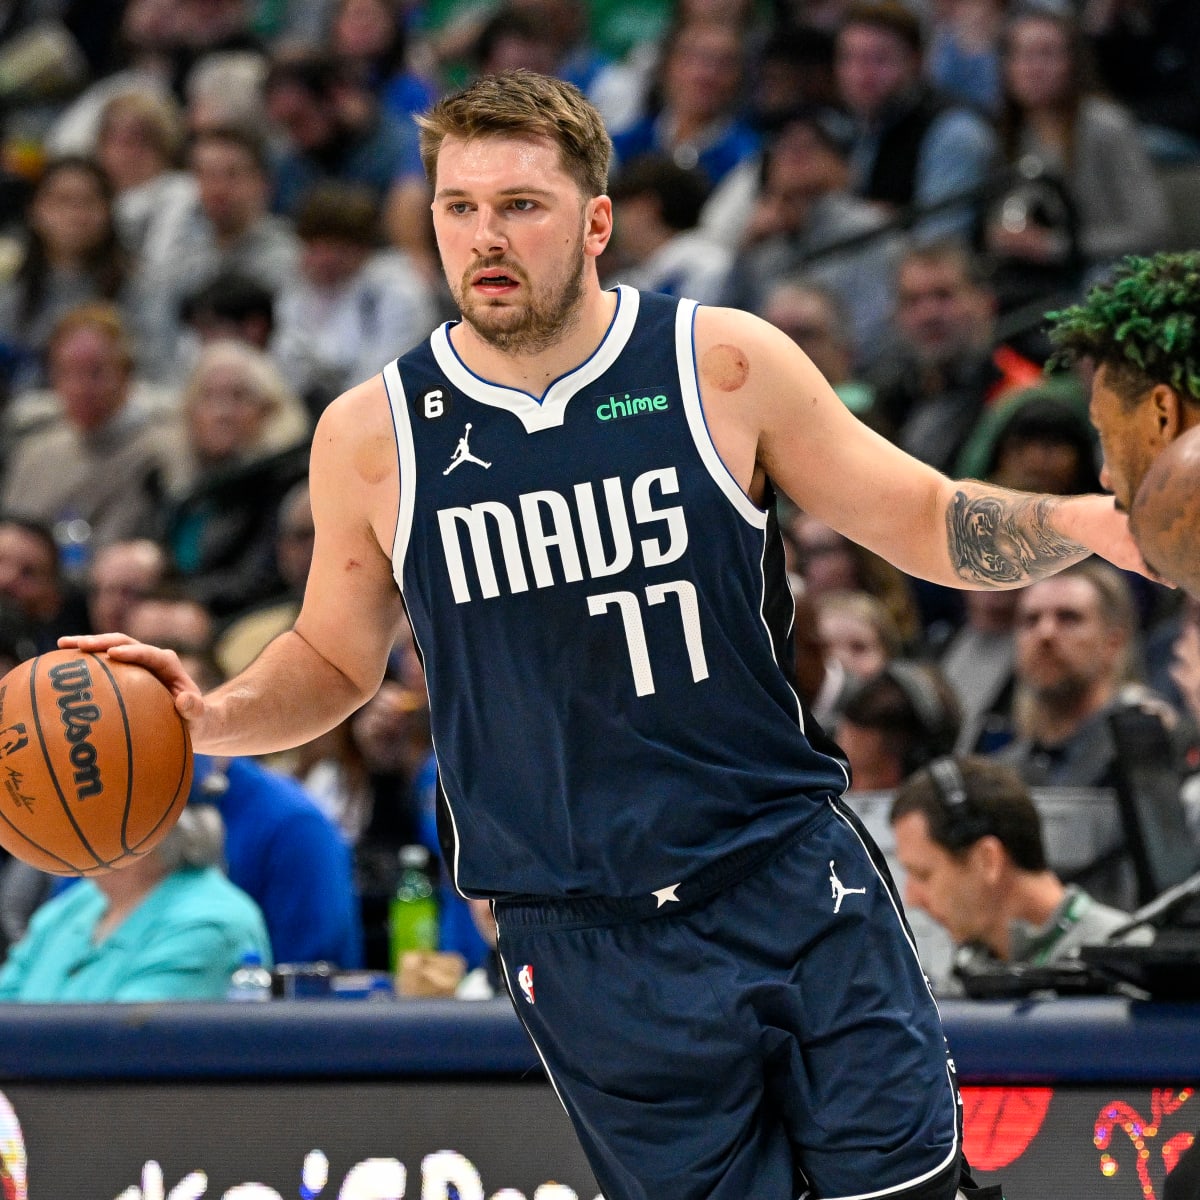 Luka Donkicks on X: Luka Dončić did not play in this afternoon's